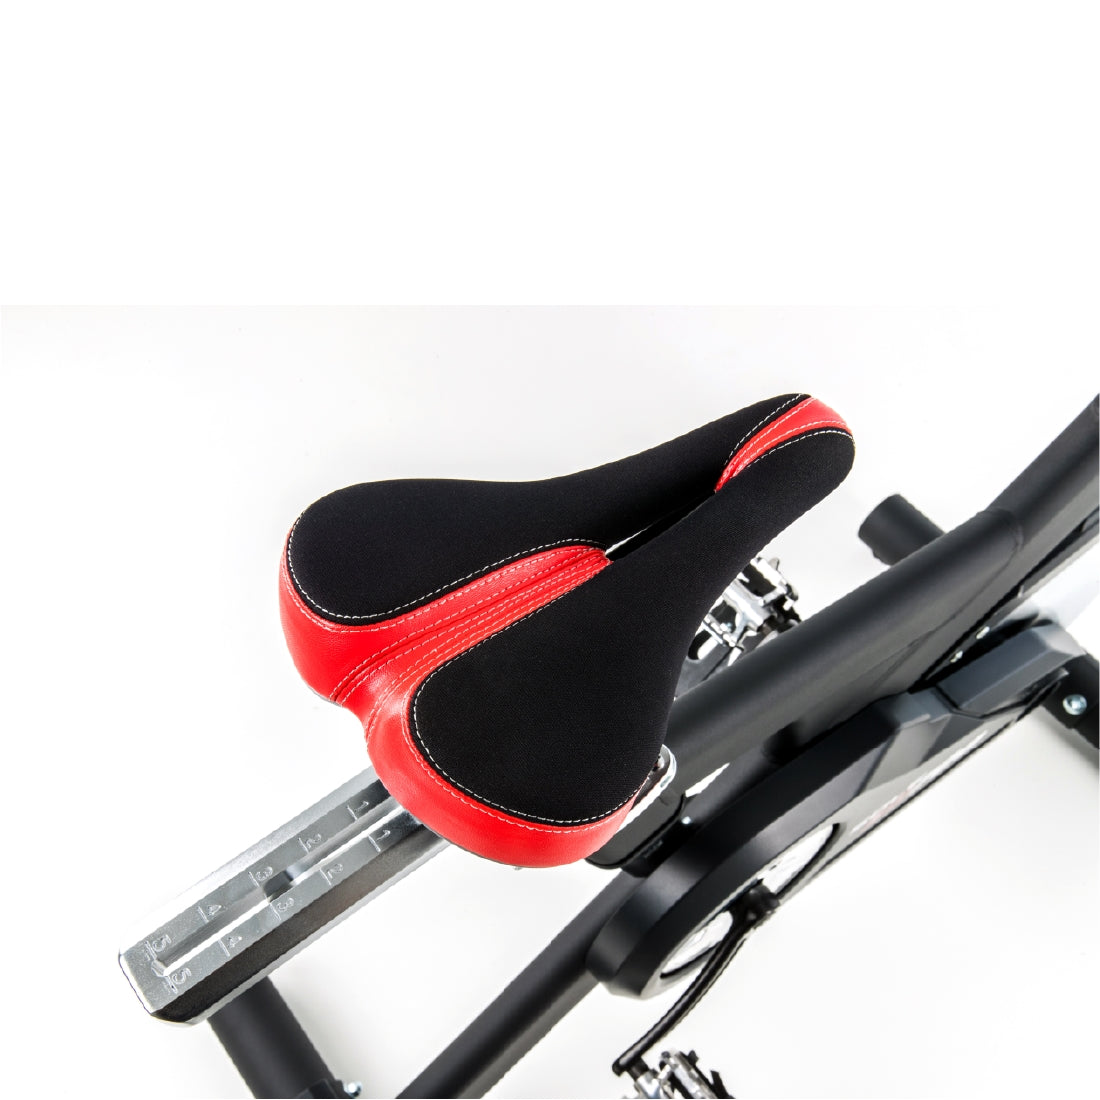 Sole SB700 Spin Exercise Bike